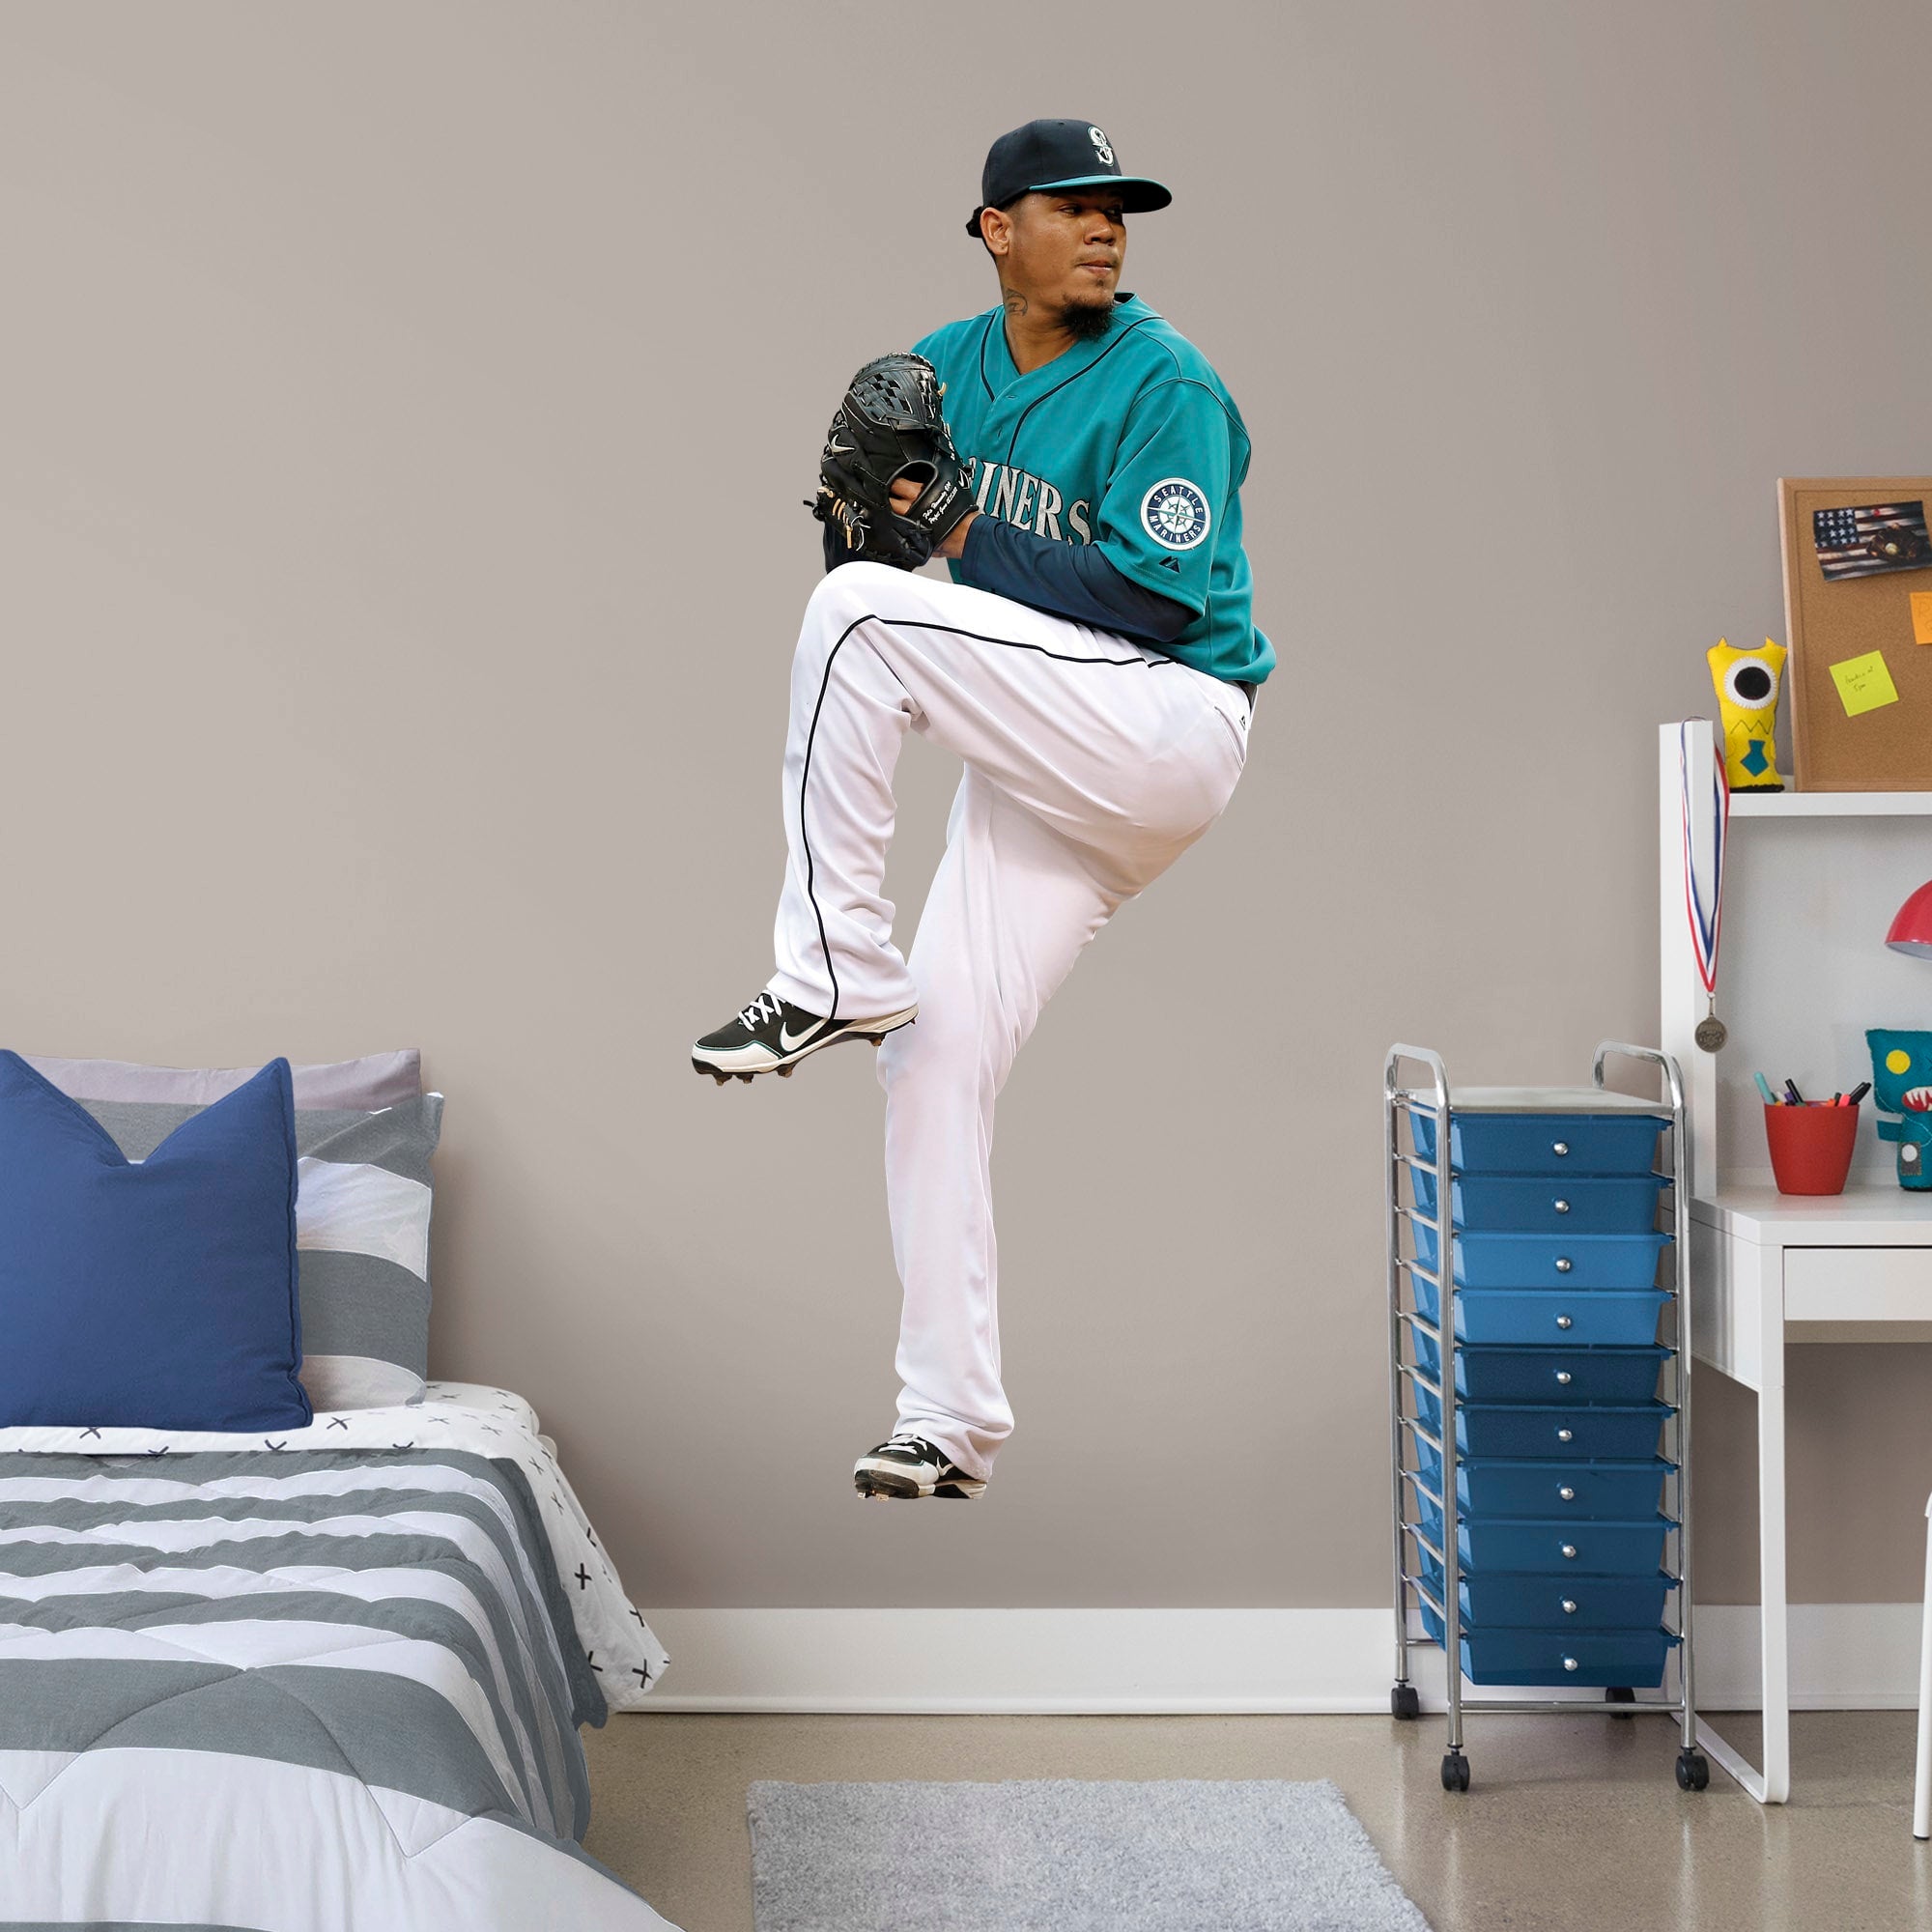 Felix Hernandez for Seattle Mariners: Pitcher - Officially Licensed MLB Removable Wall Decal Giant Athlete + 2 Decals (22"W x 51